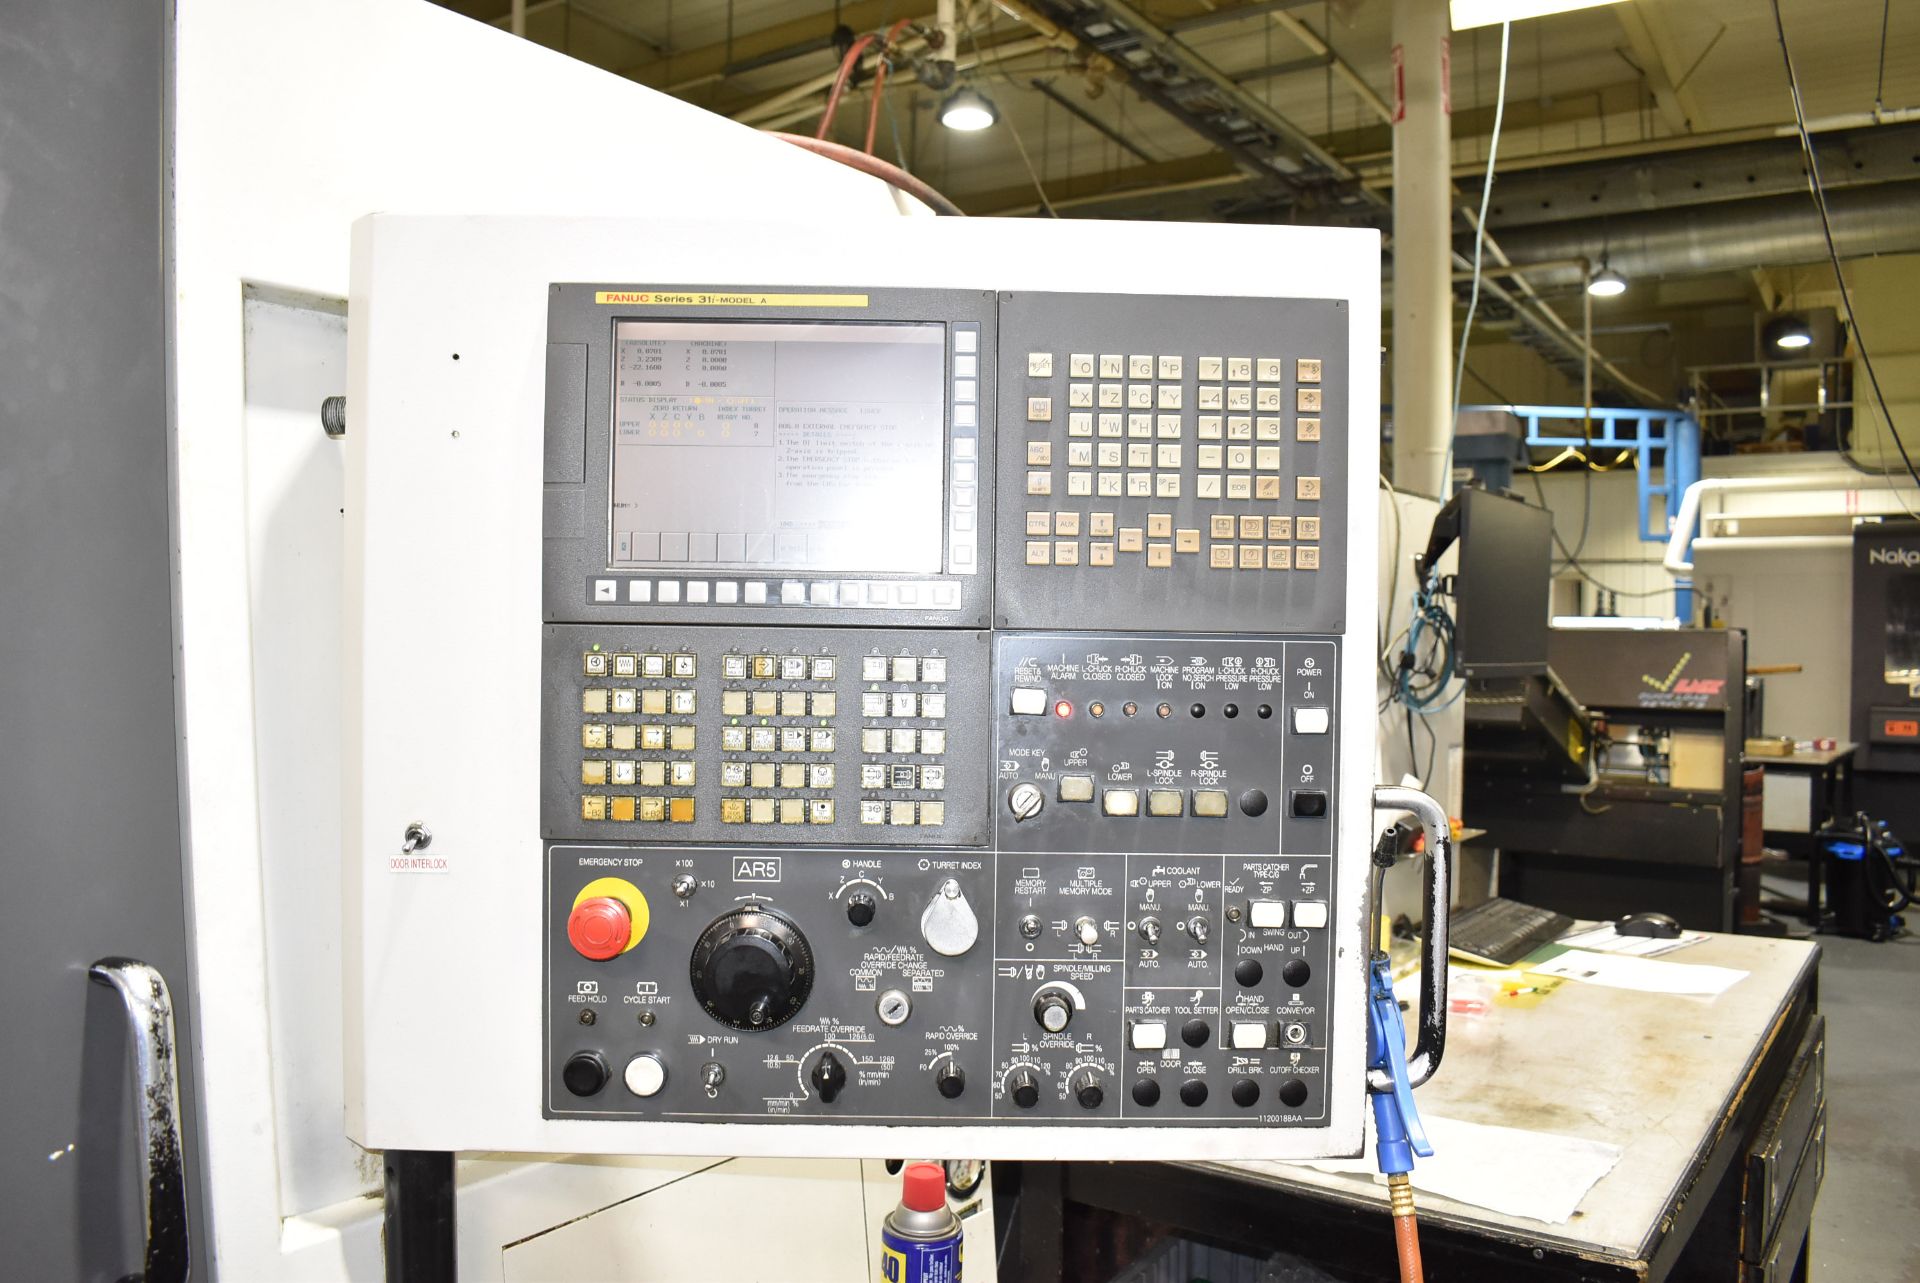 NAKAMURA-TOME (2005) WT-100 MMYS MULTI-AXIS OPPOSED SPINDLE AND TWIN TURRET CNC MULTI-TASKING CENTER - Image 8 of 17